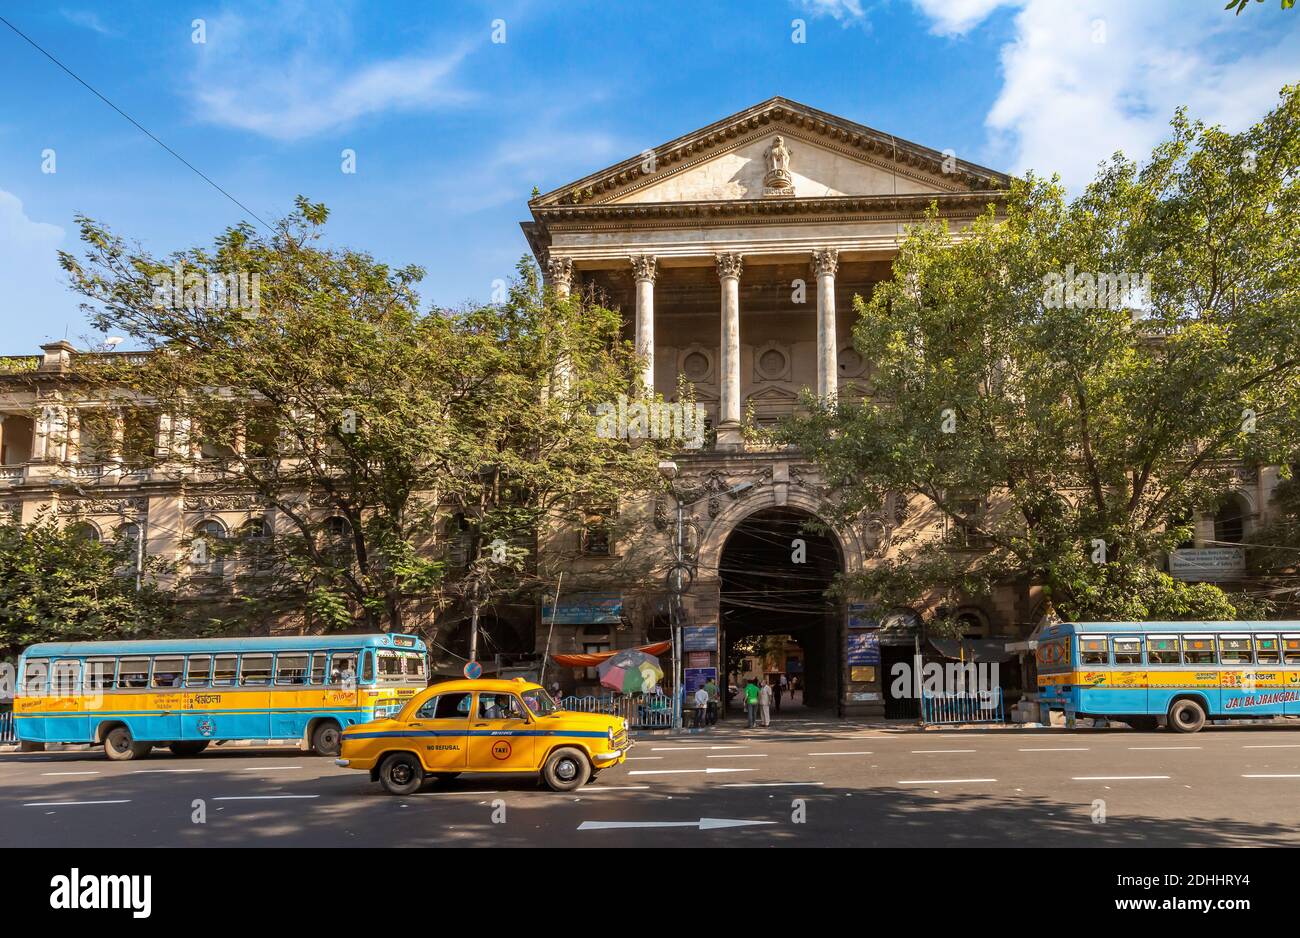 Public transport vehicles on Indian city road with old heritage buildings at Esplanade Kolkata Stock Photo